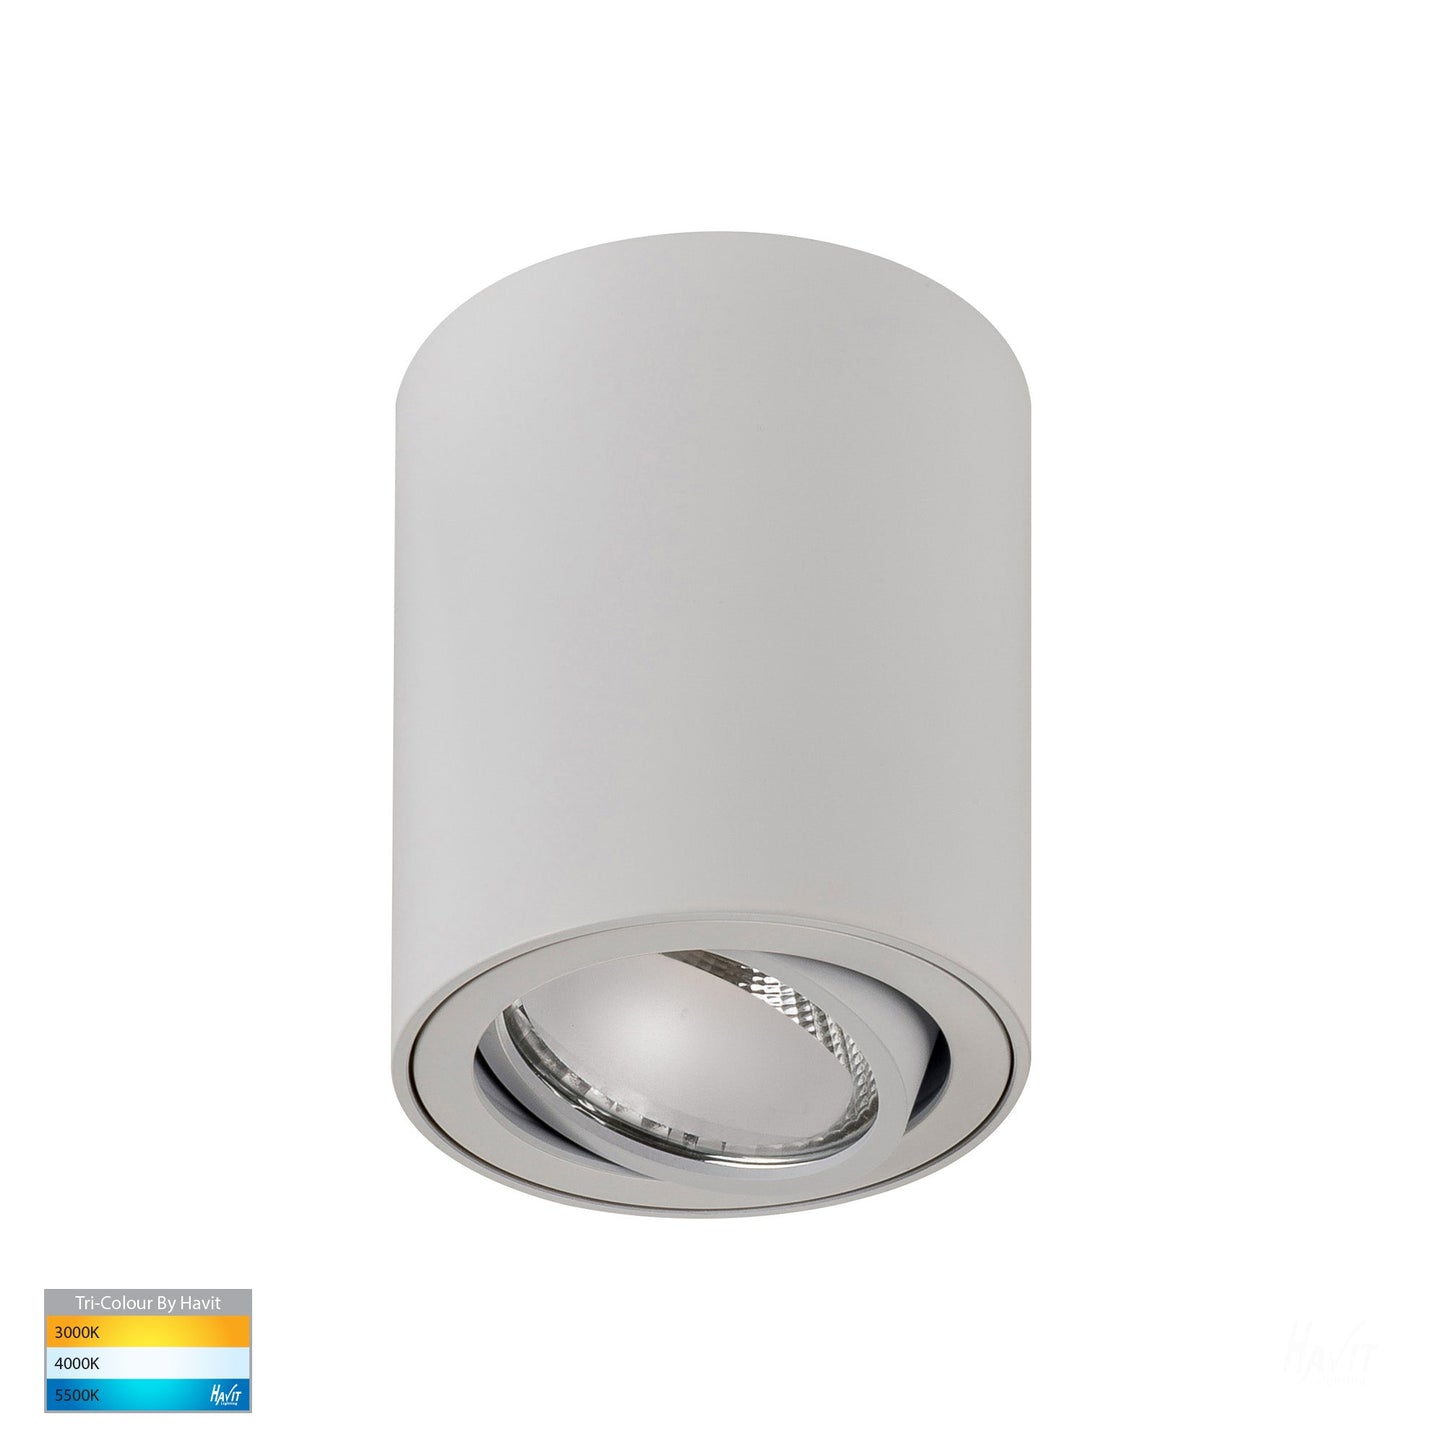 White Surface Mounted Adjustable Round Downlight  HV5812t-Wht